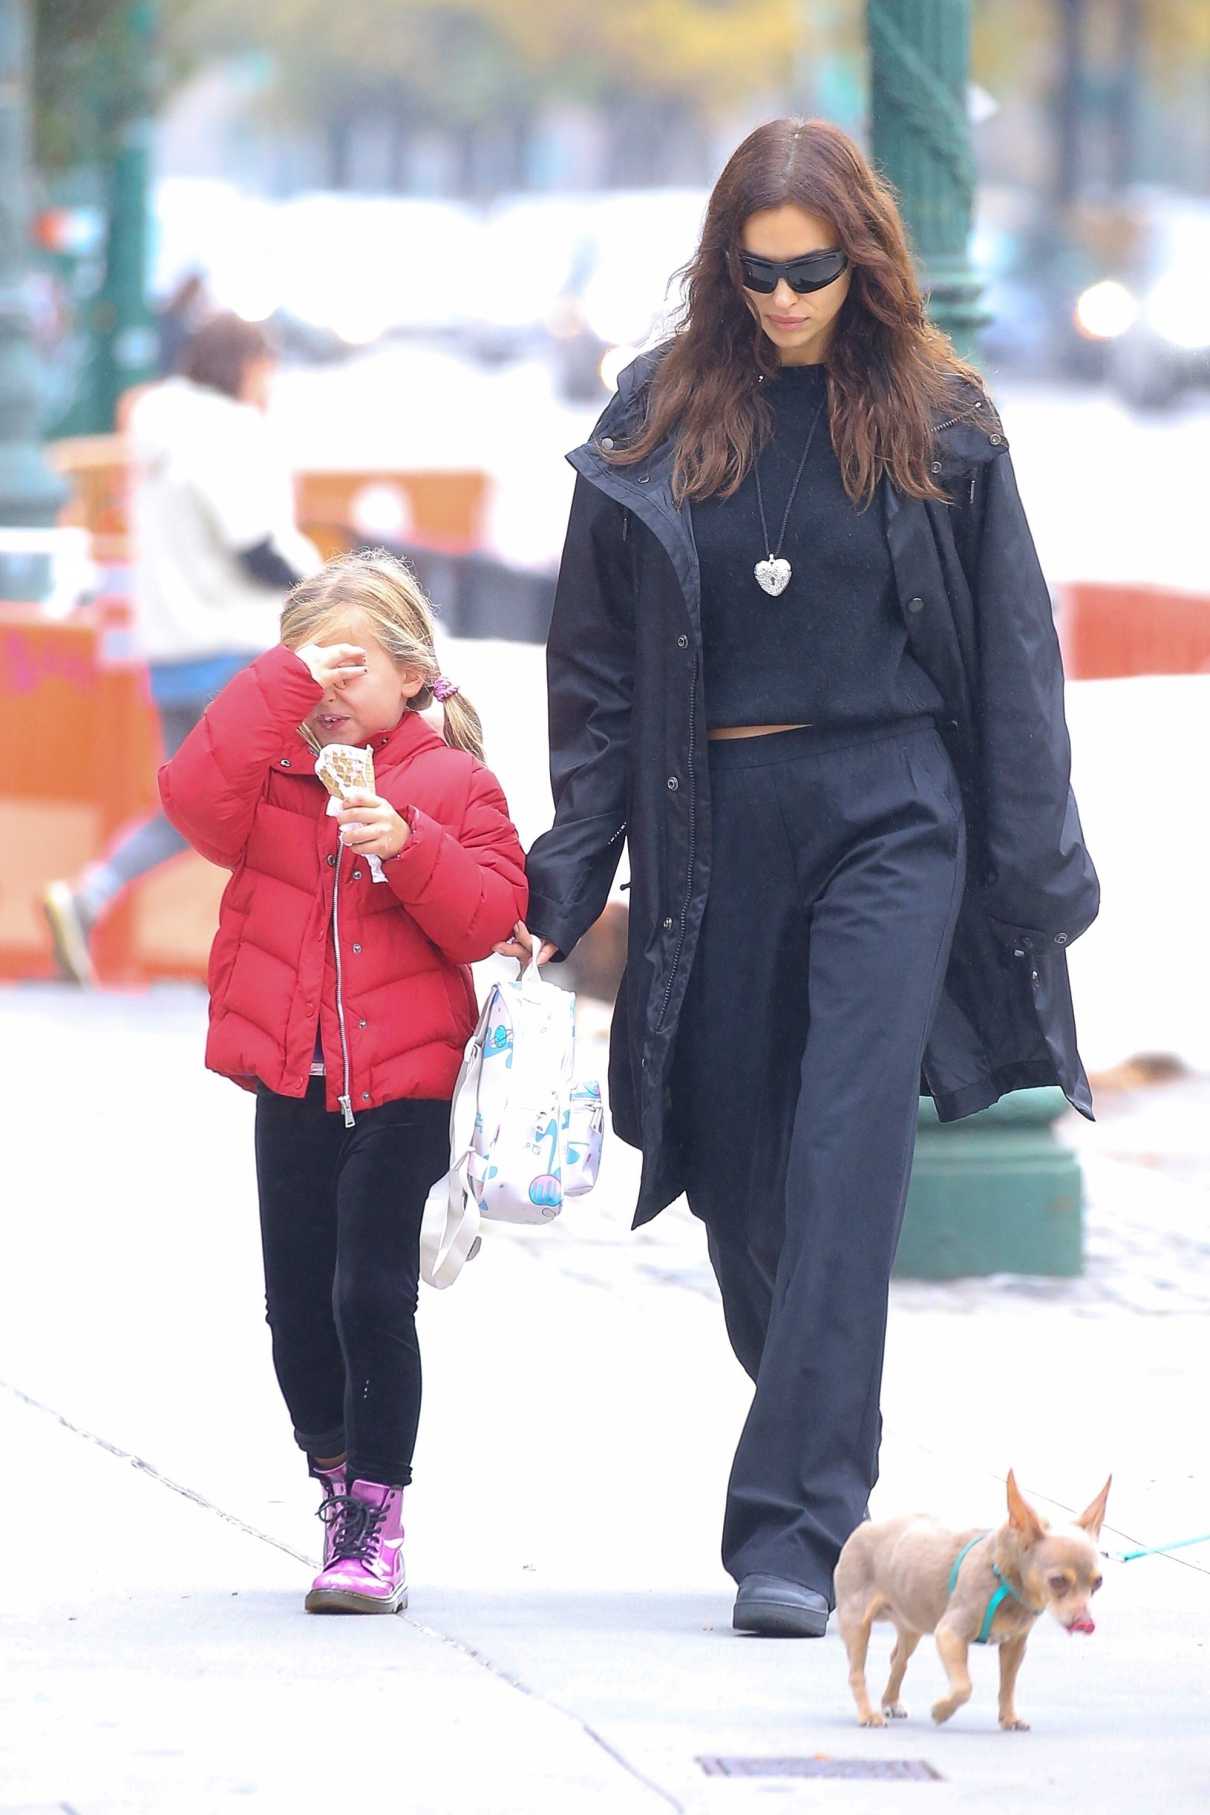 Irina Shayk in a Black Outfit